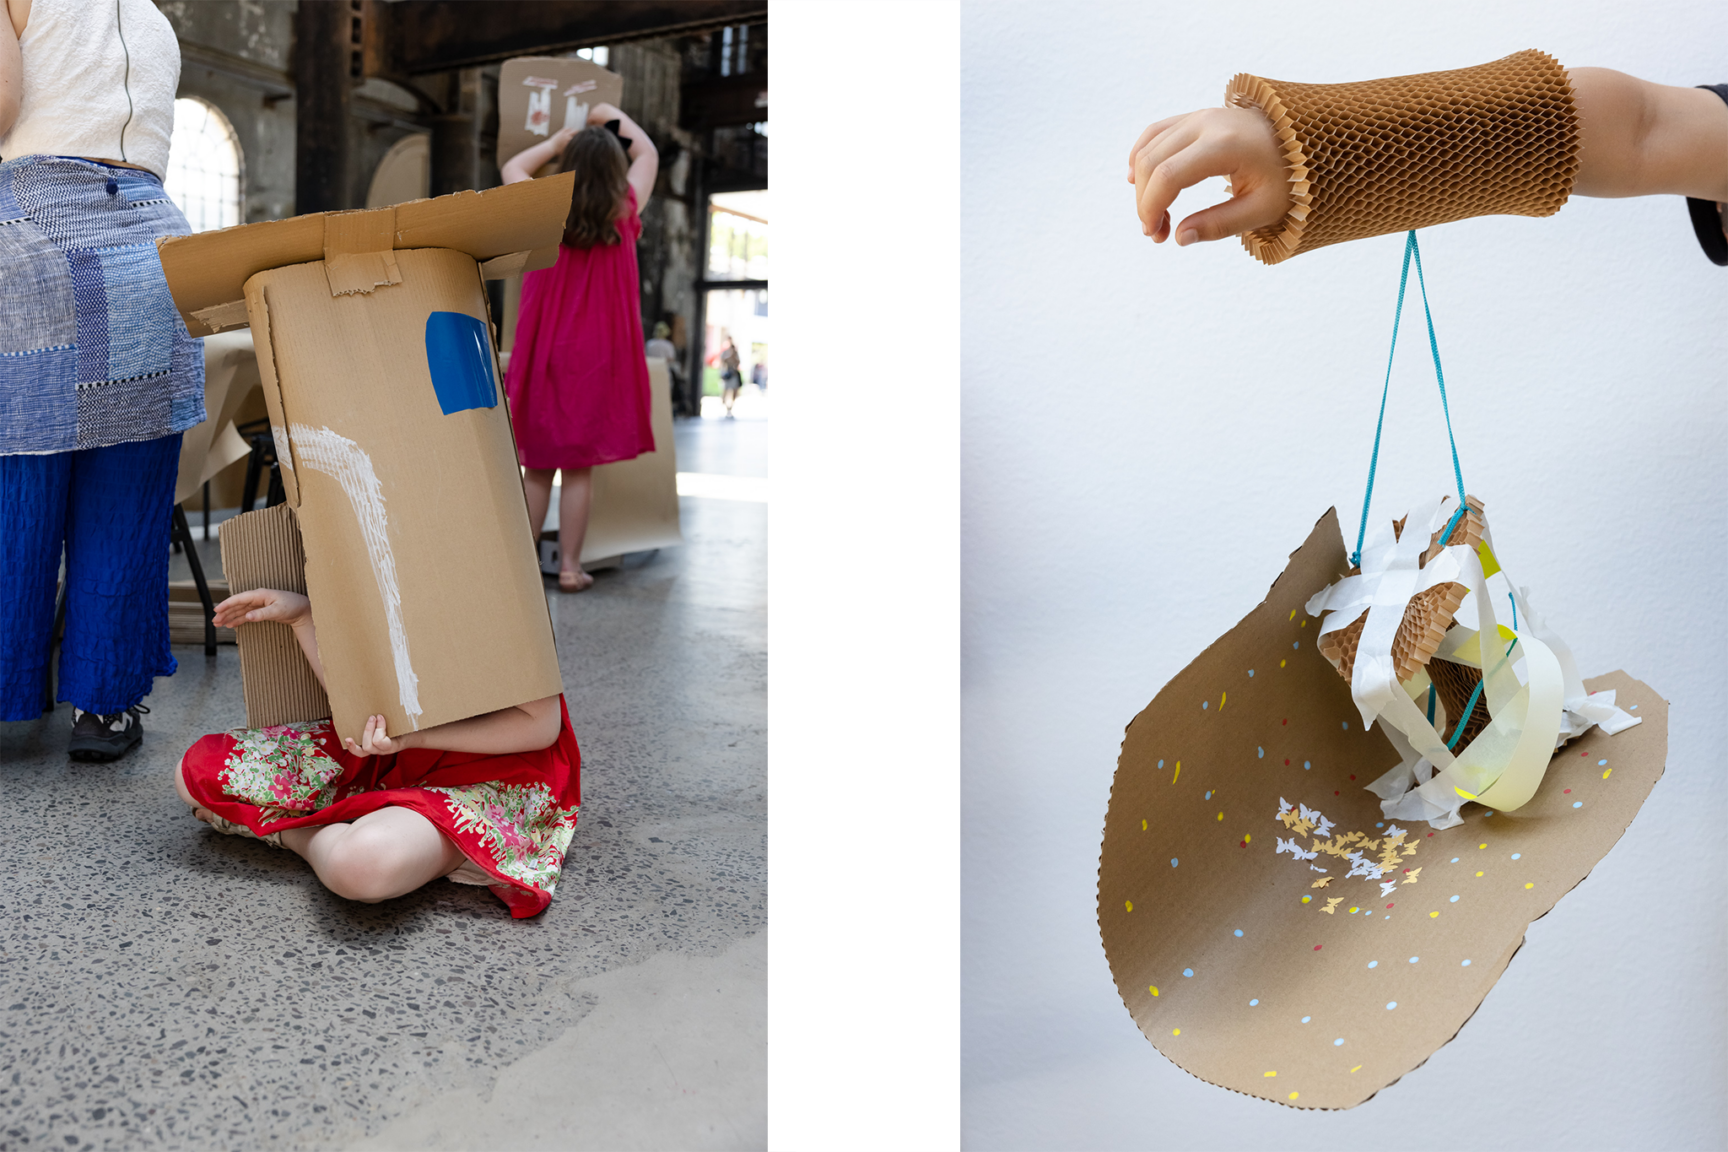 image 1: a child sitting cross-legged with a cardboard box over their head image 2: a hand wearing a cardboard bangle with a cardboard structure hanging by string